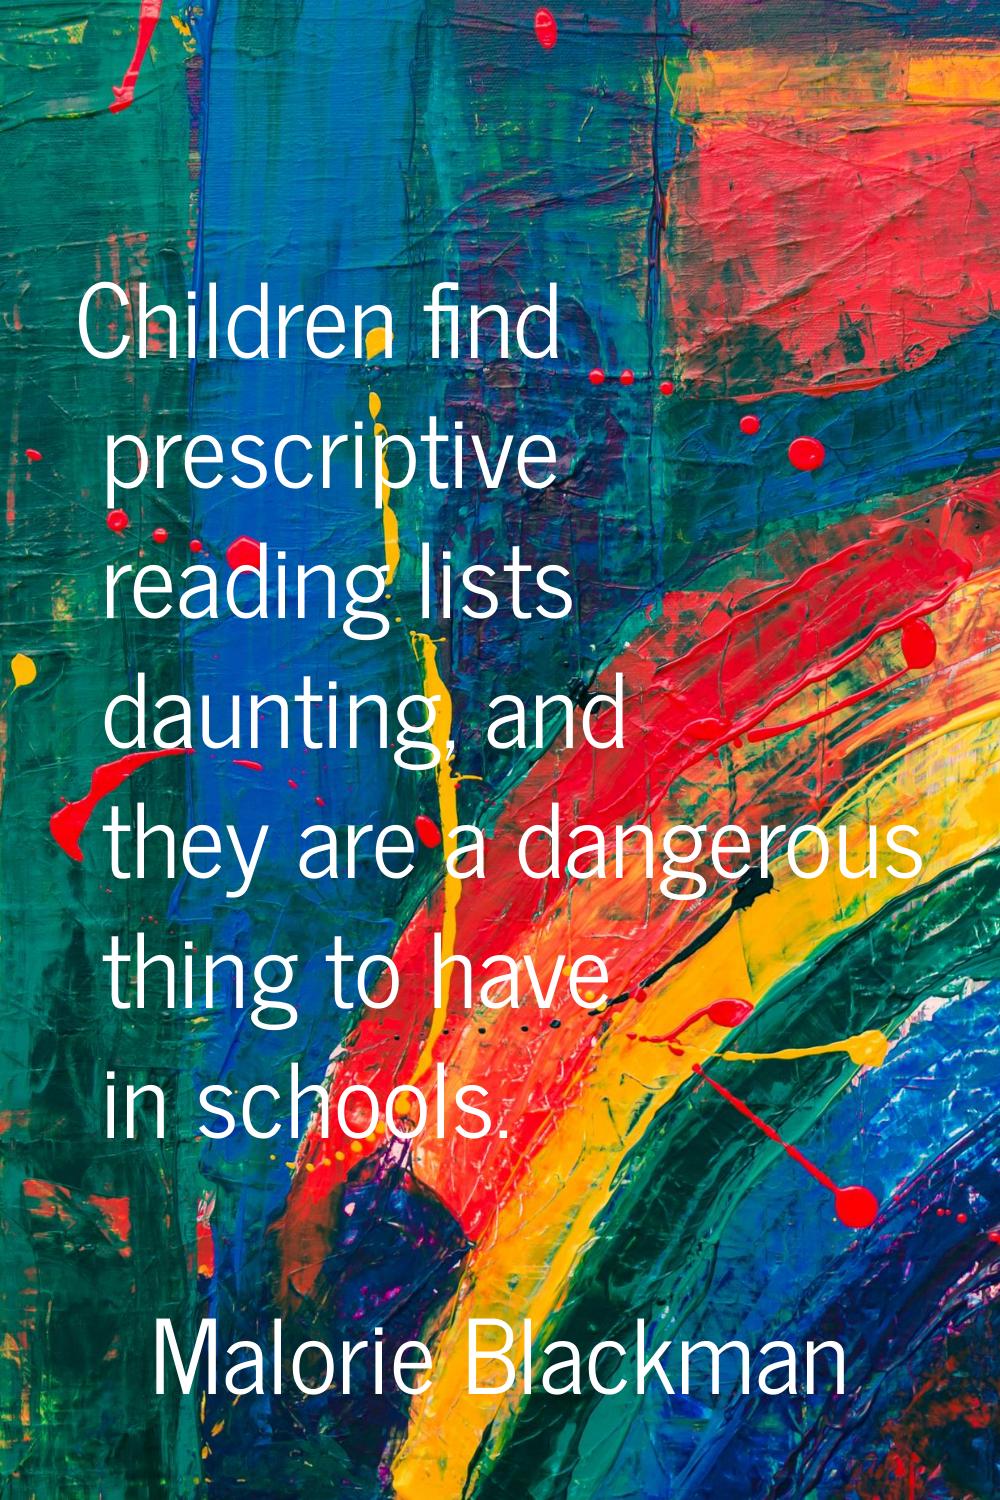 Children find prescriptive reading lists daunting, and they are a dangerous thing to have in school